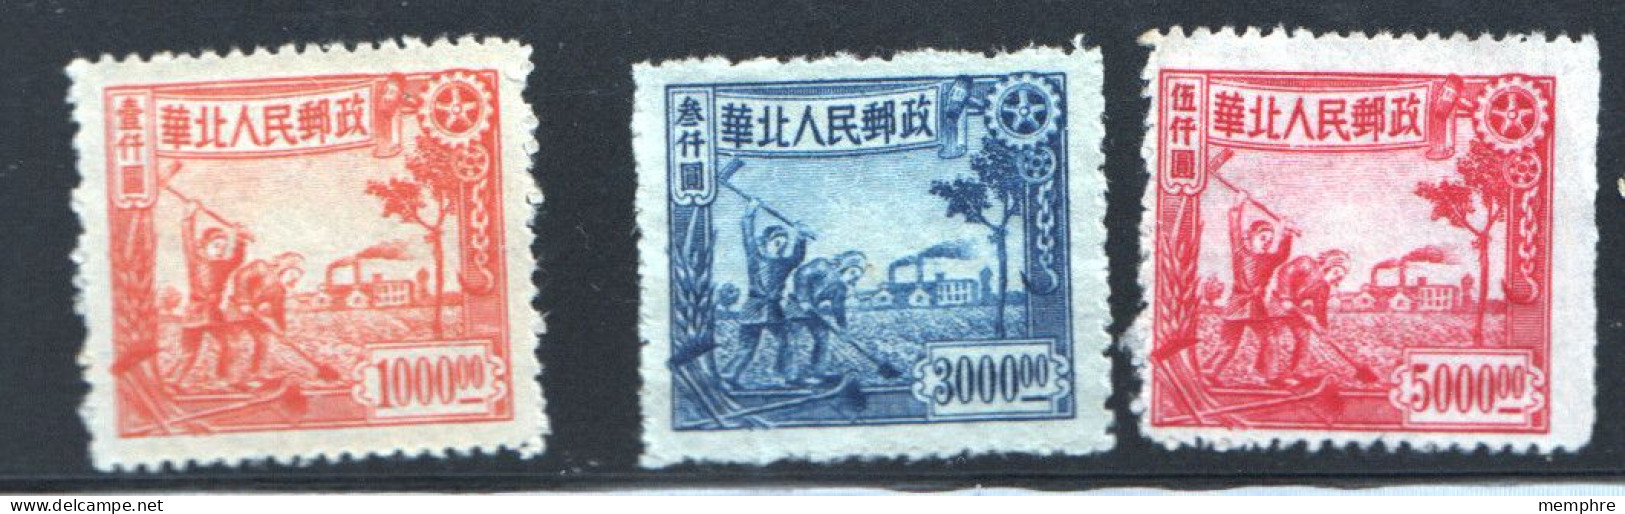 1949 North China Peasants And Actory Complete Set Of 3 Sc 3L96-8 No Gum, As Issued - China Dela Norte 1949-50